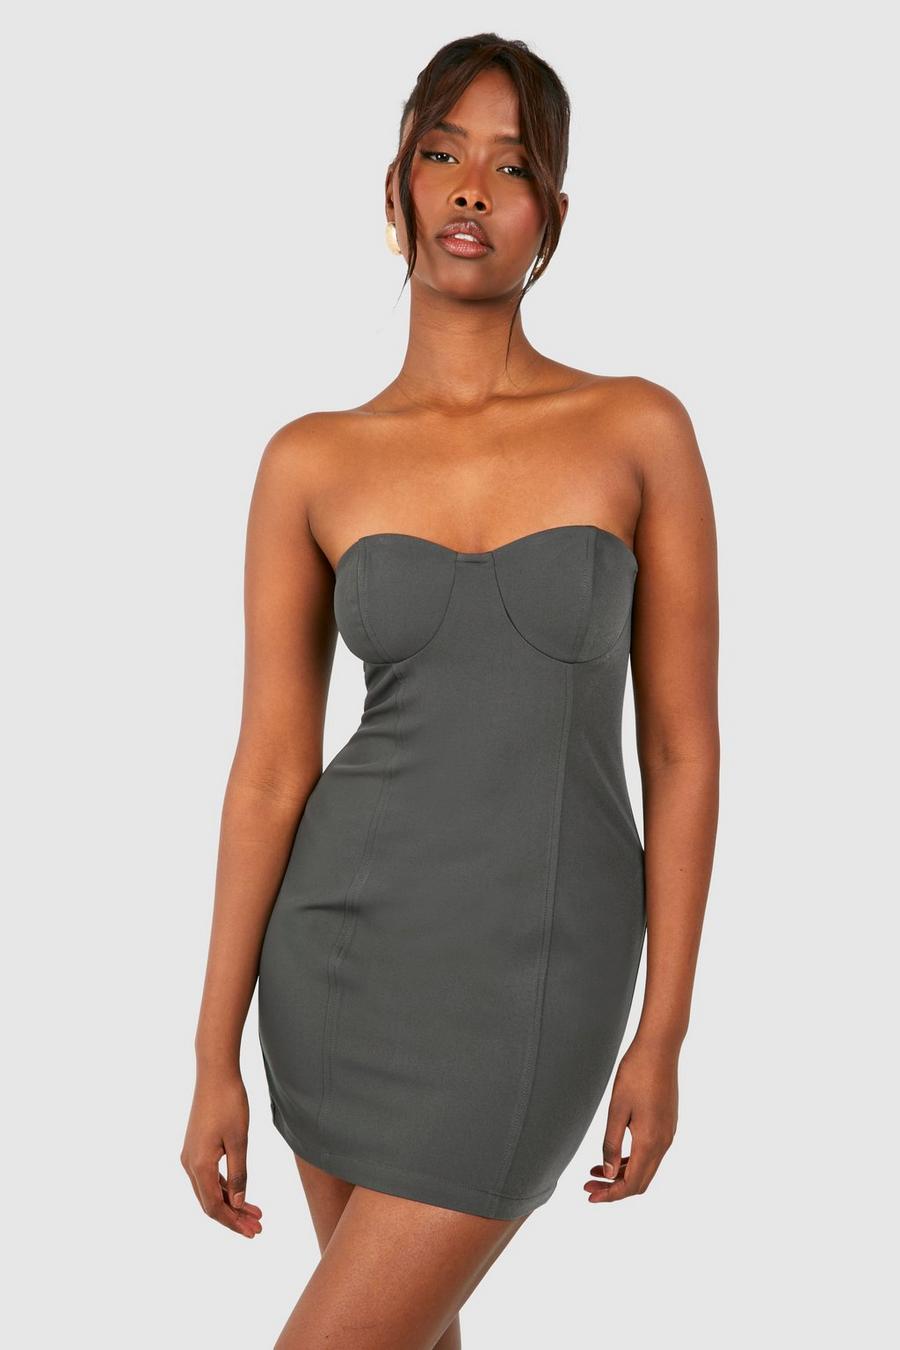 Charcoal Getailleerde Strapless Mini Jurk image number 1